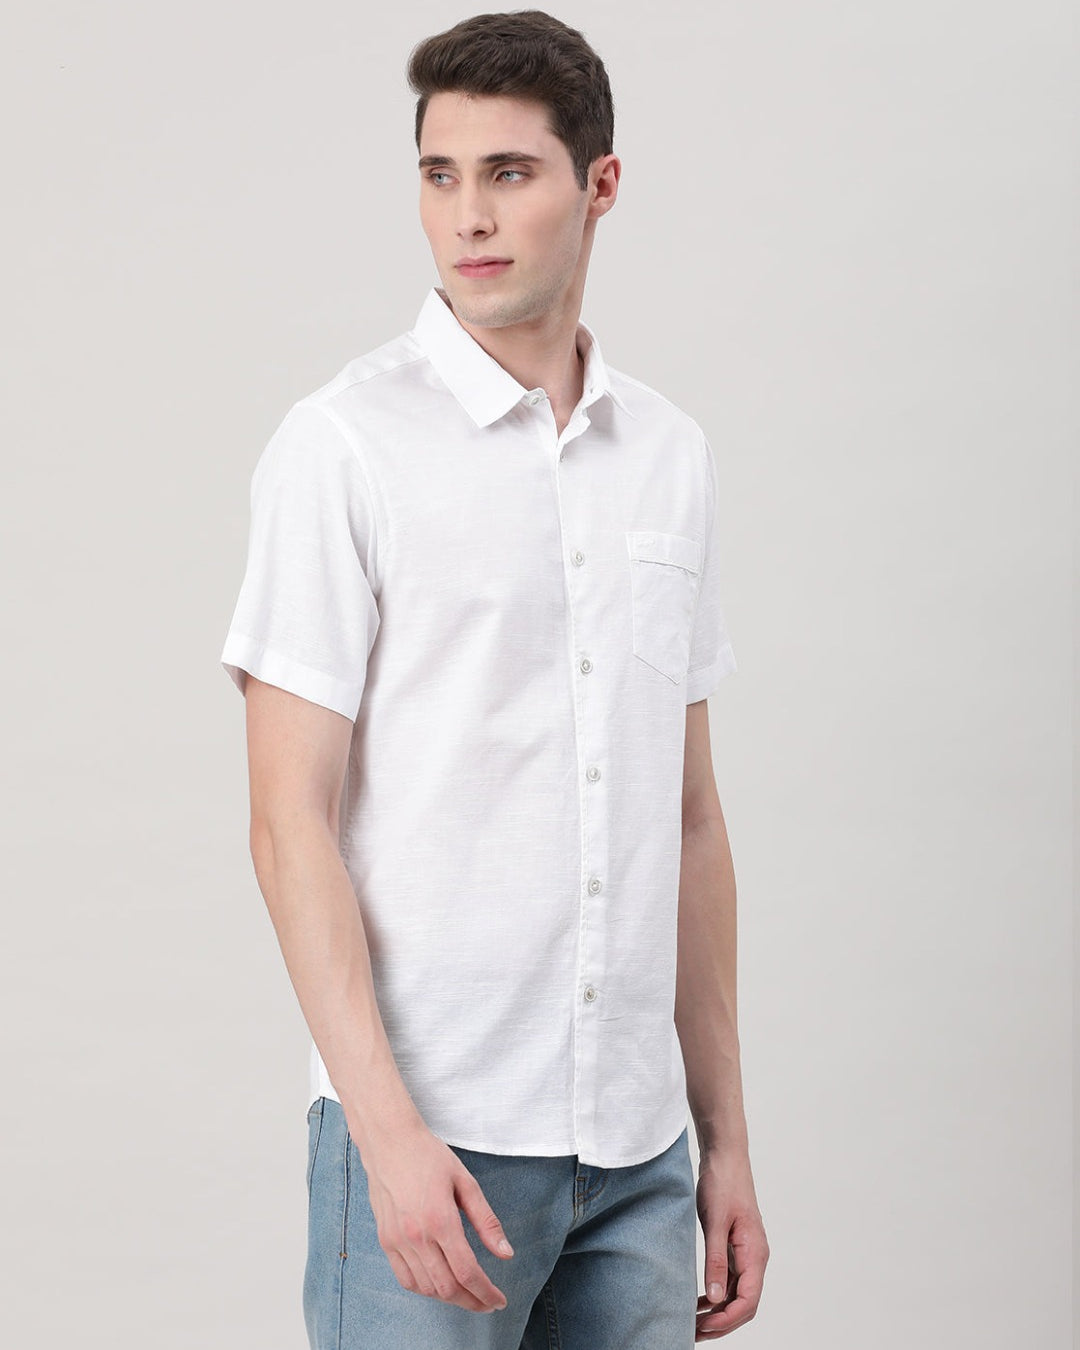 Casual Half Sleeve Comfort Fit Textured plain shirt White with Collar